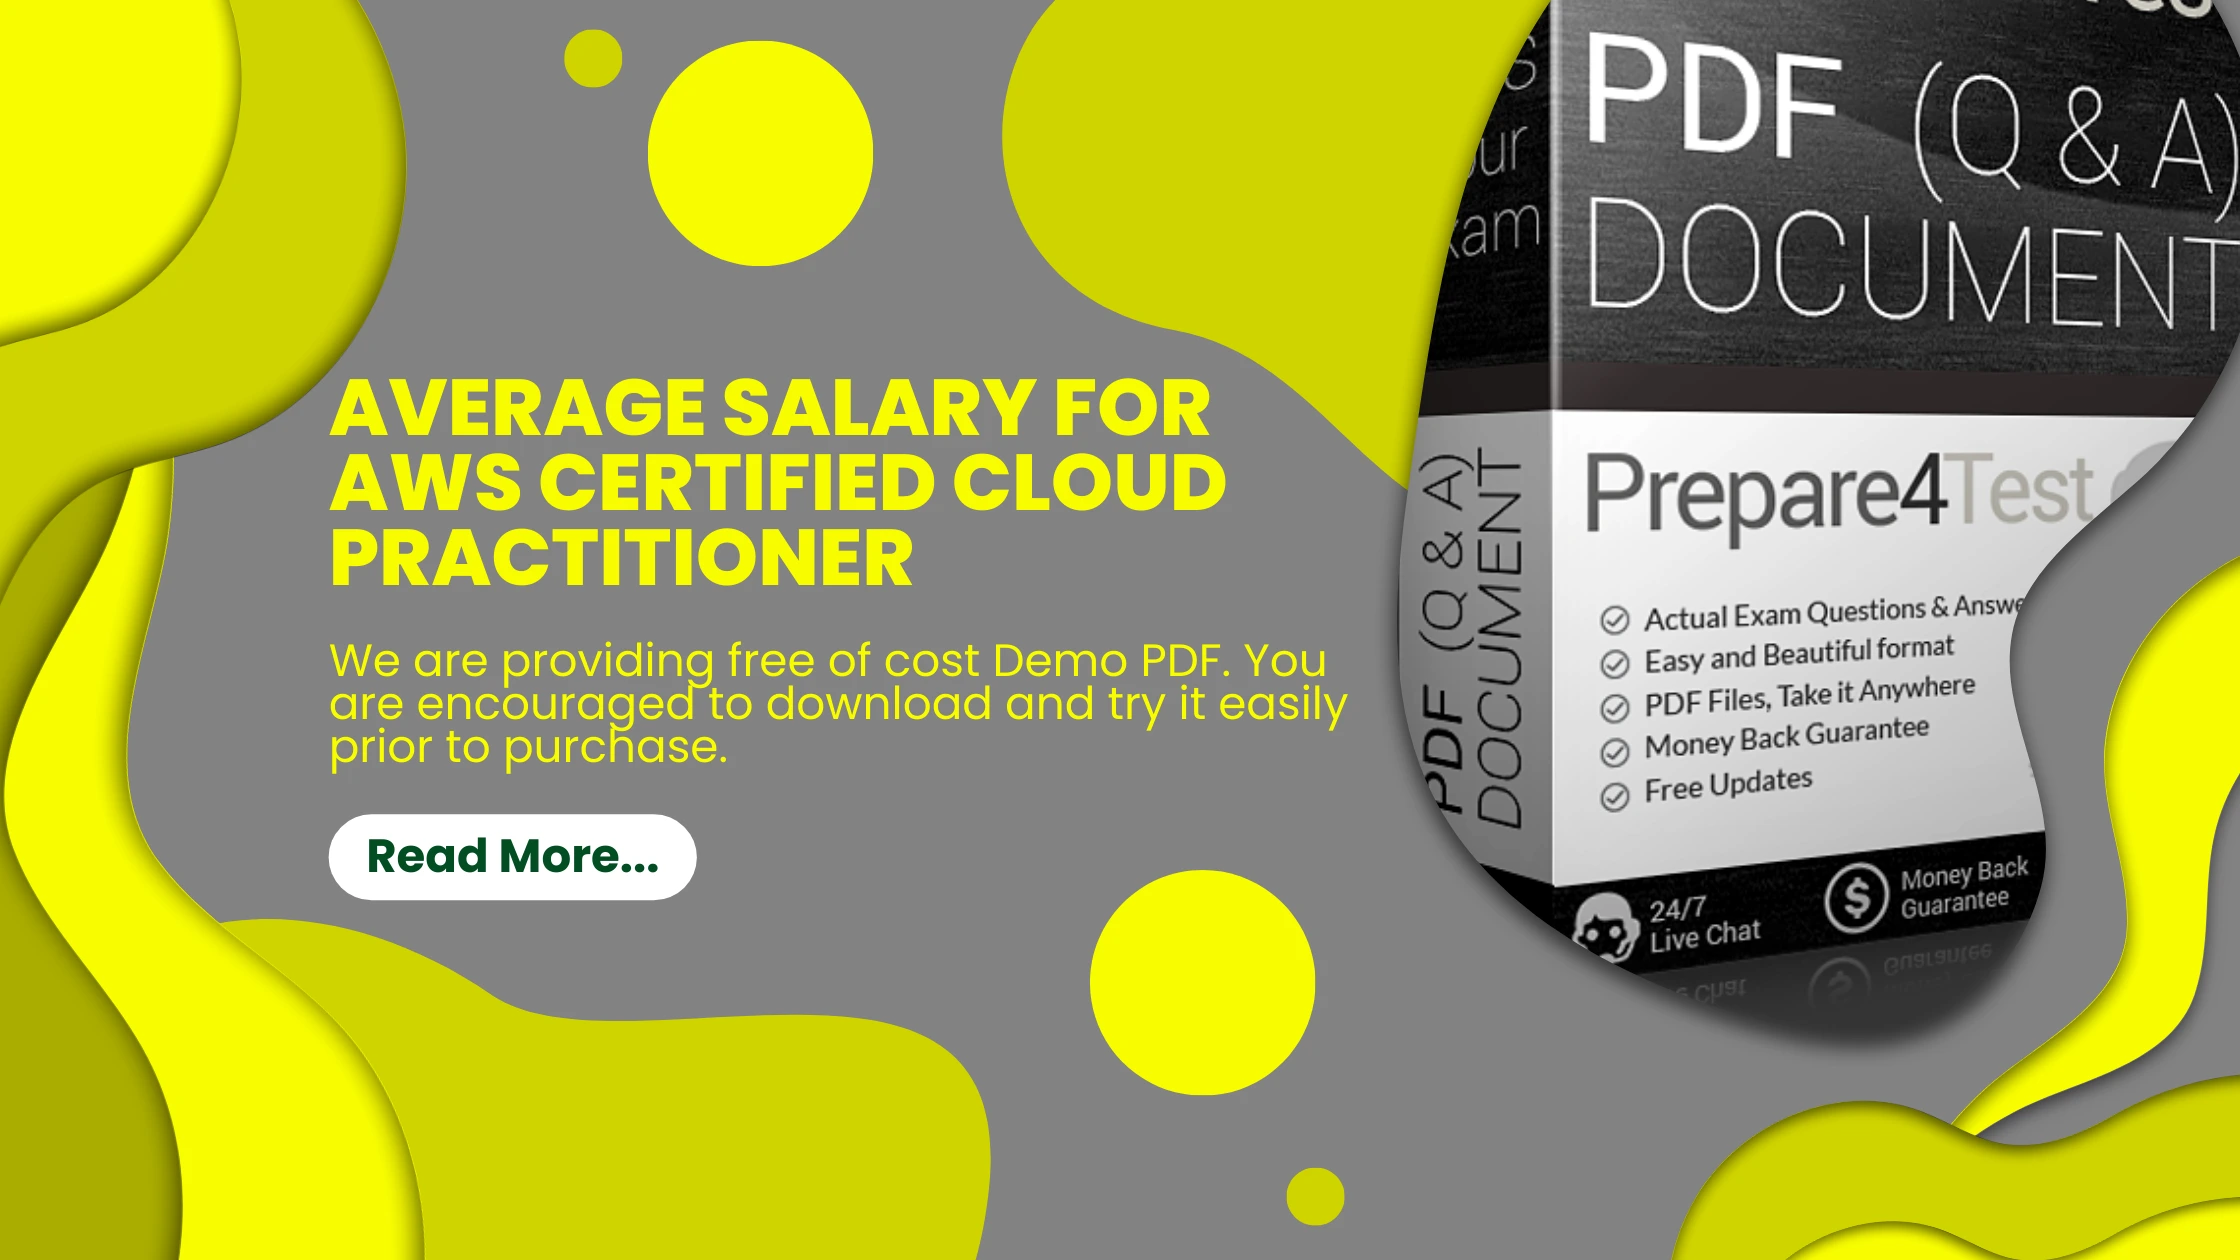 Average Salary For AWS Certified Cloud Practitioner